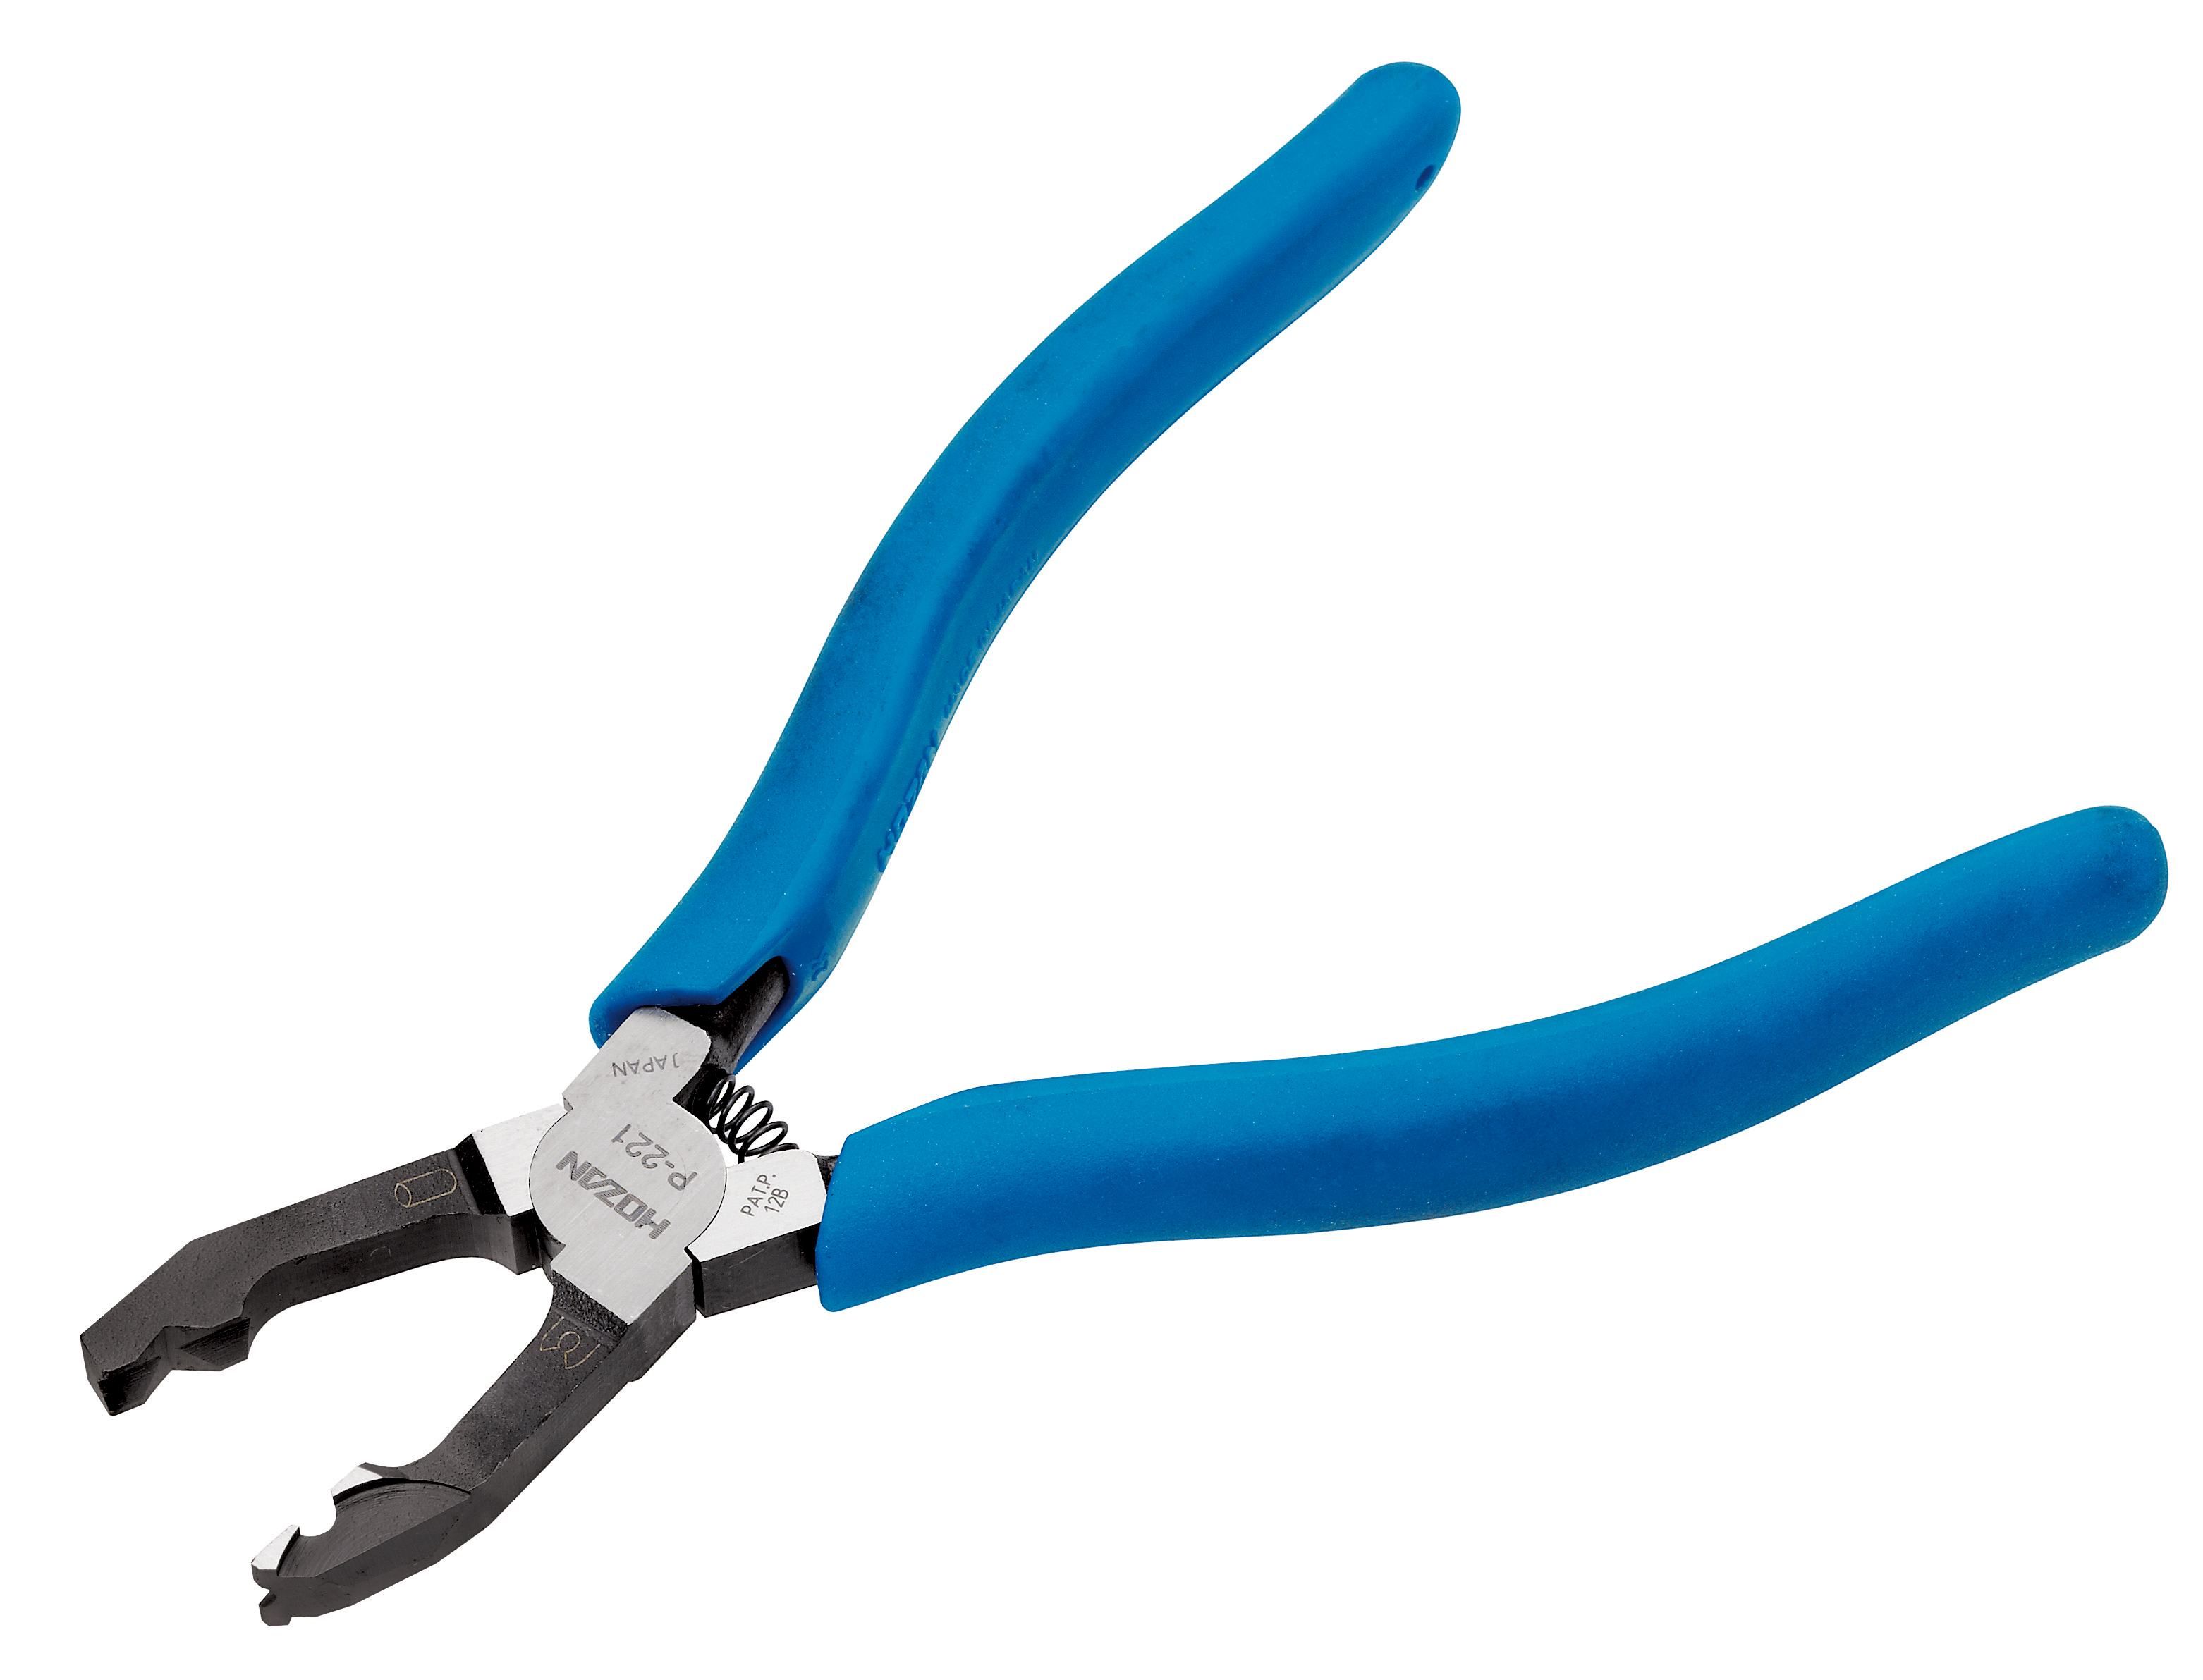 Chain Pliers (2 Way Type Tip)